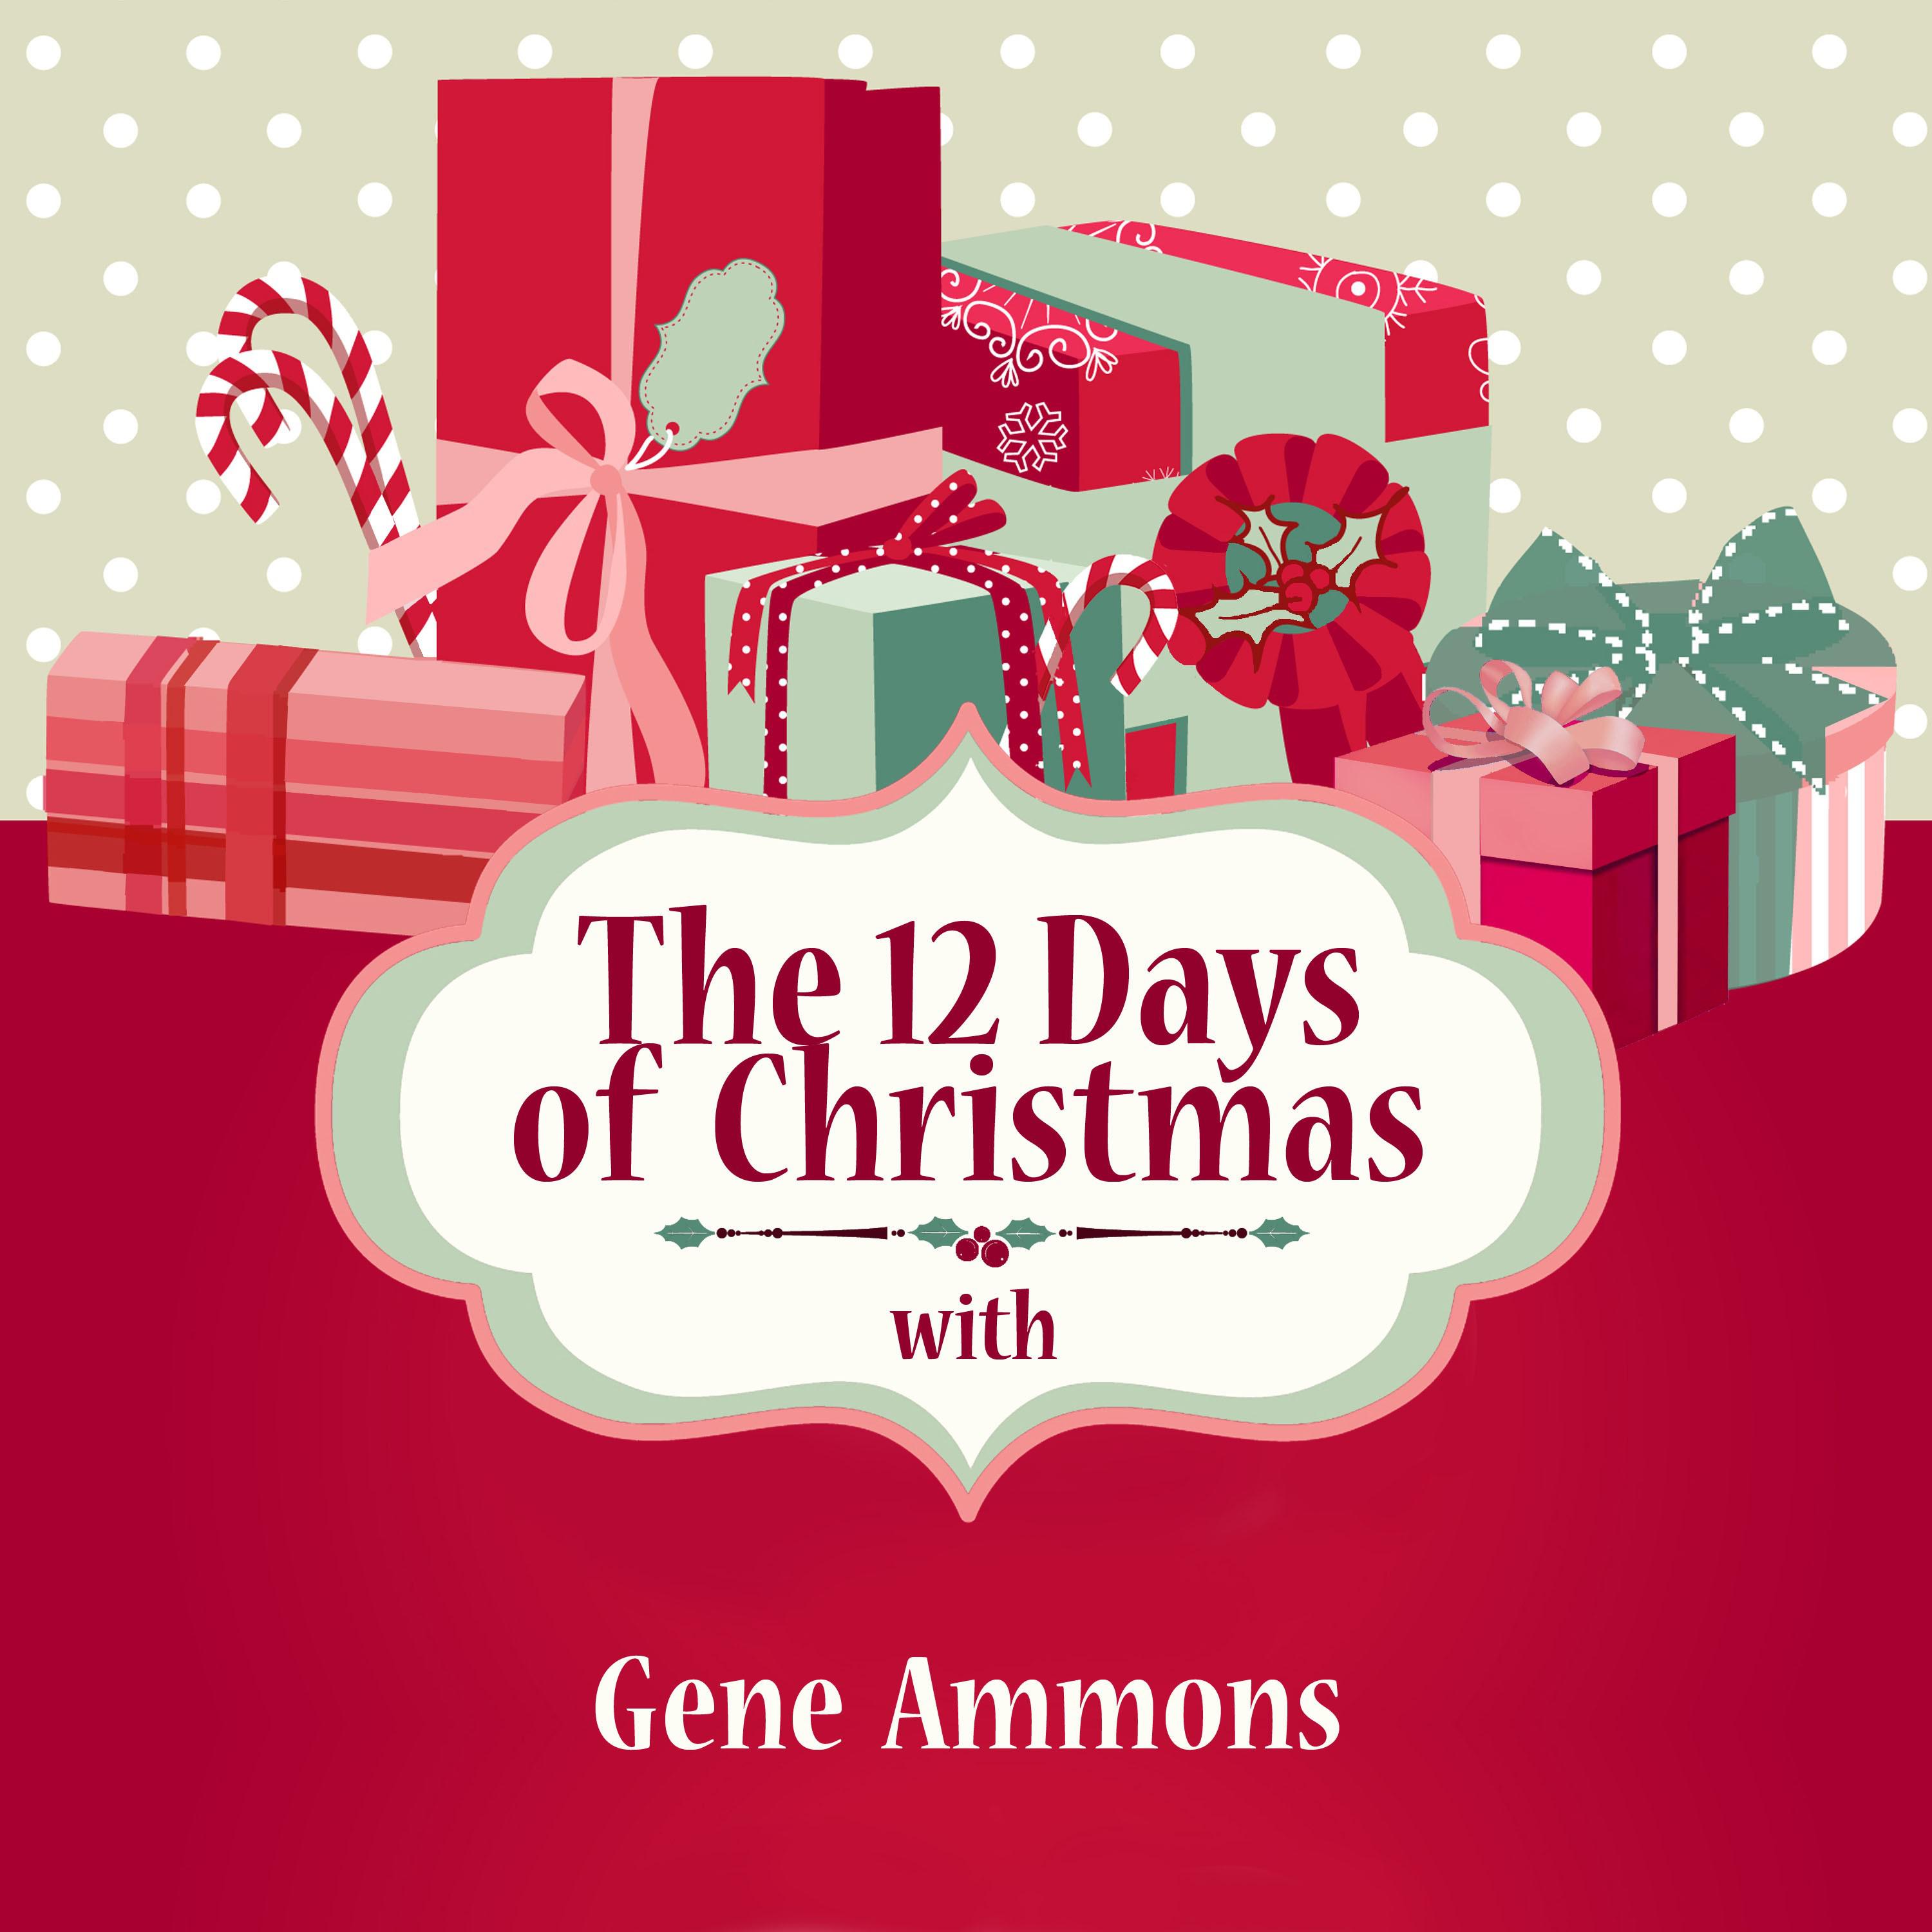 The 12 Days of Christmas with Gene Ammons